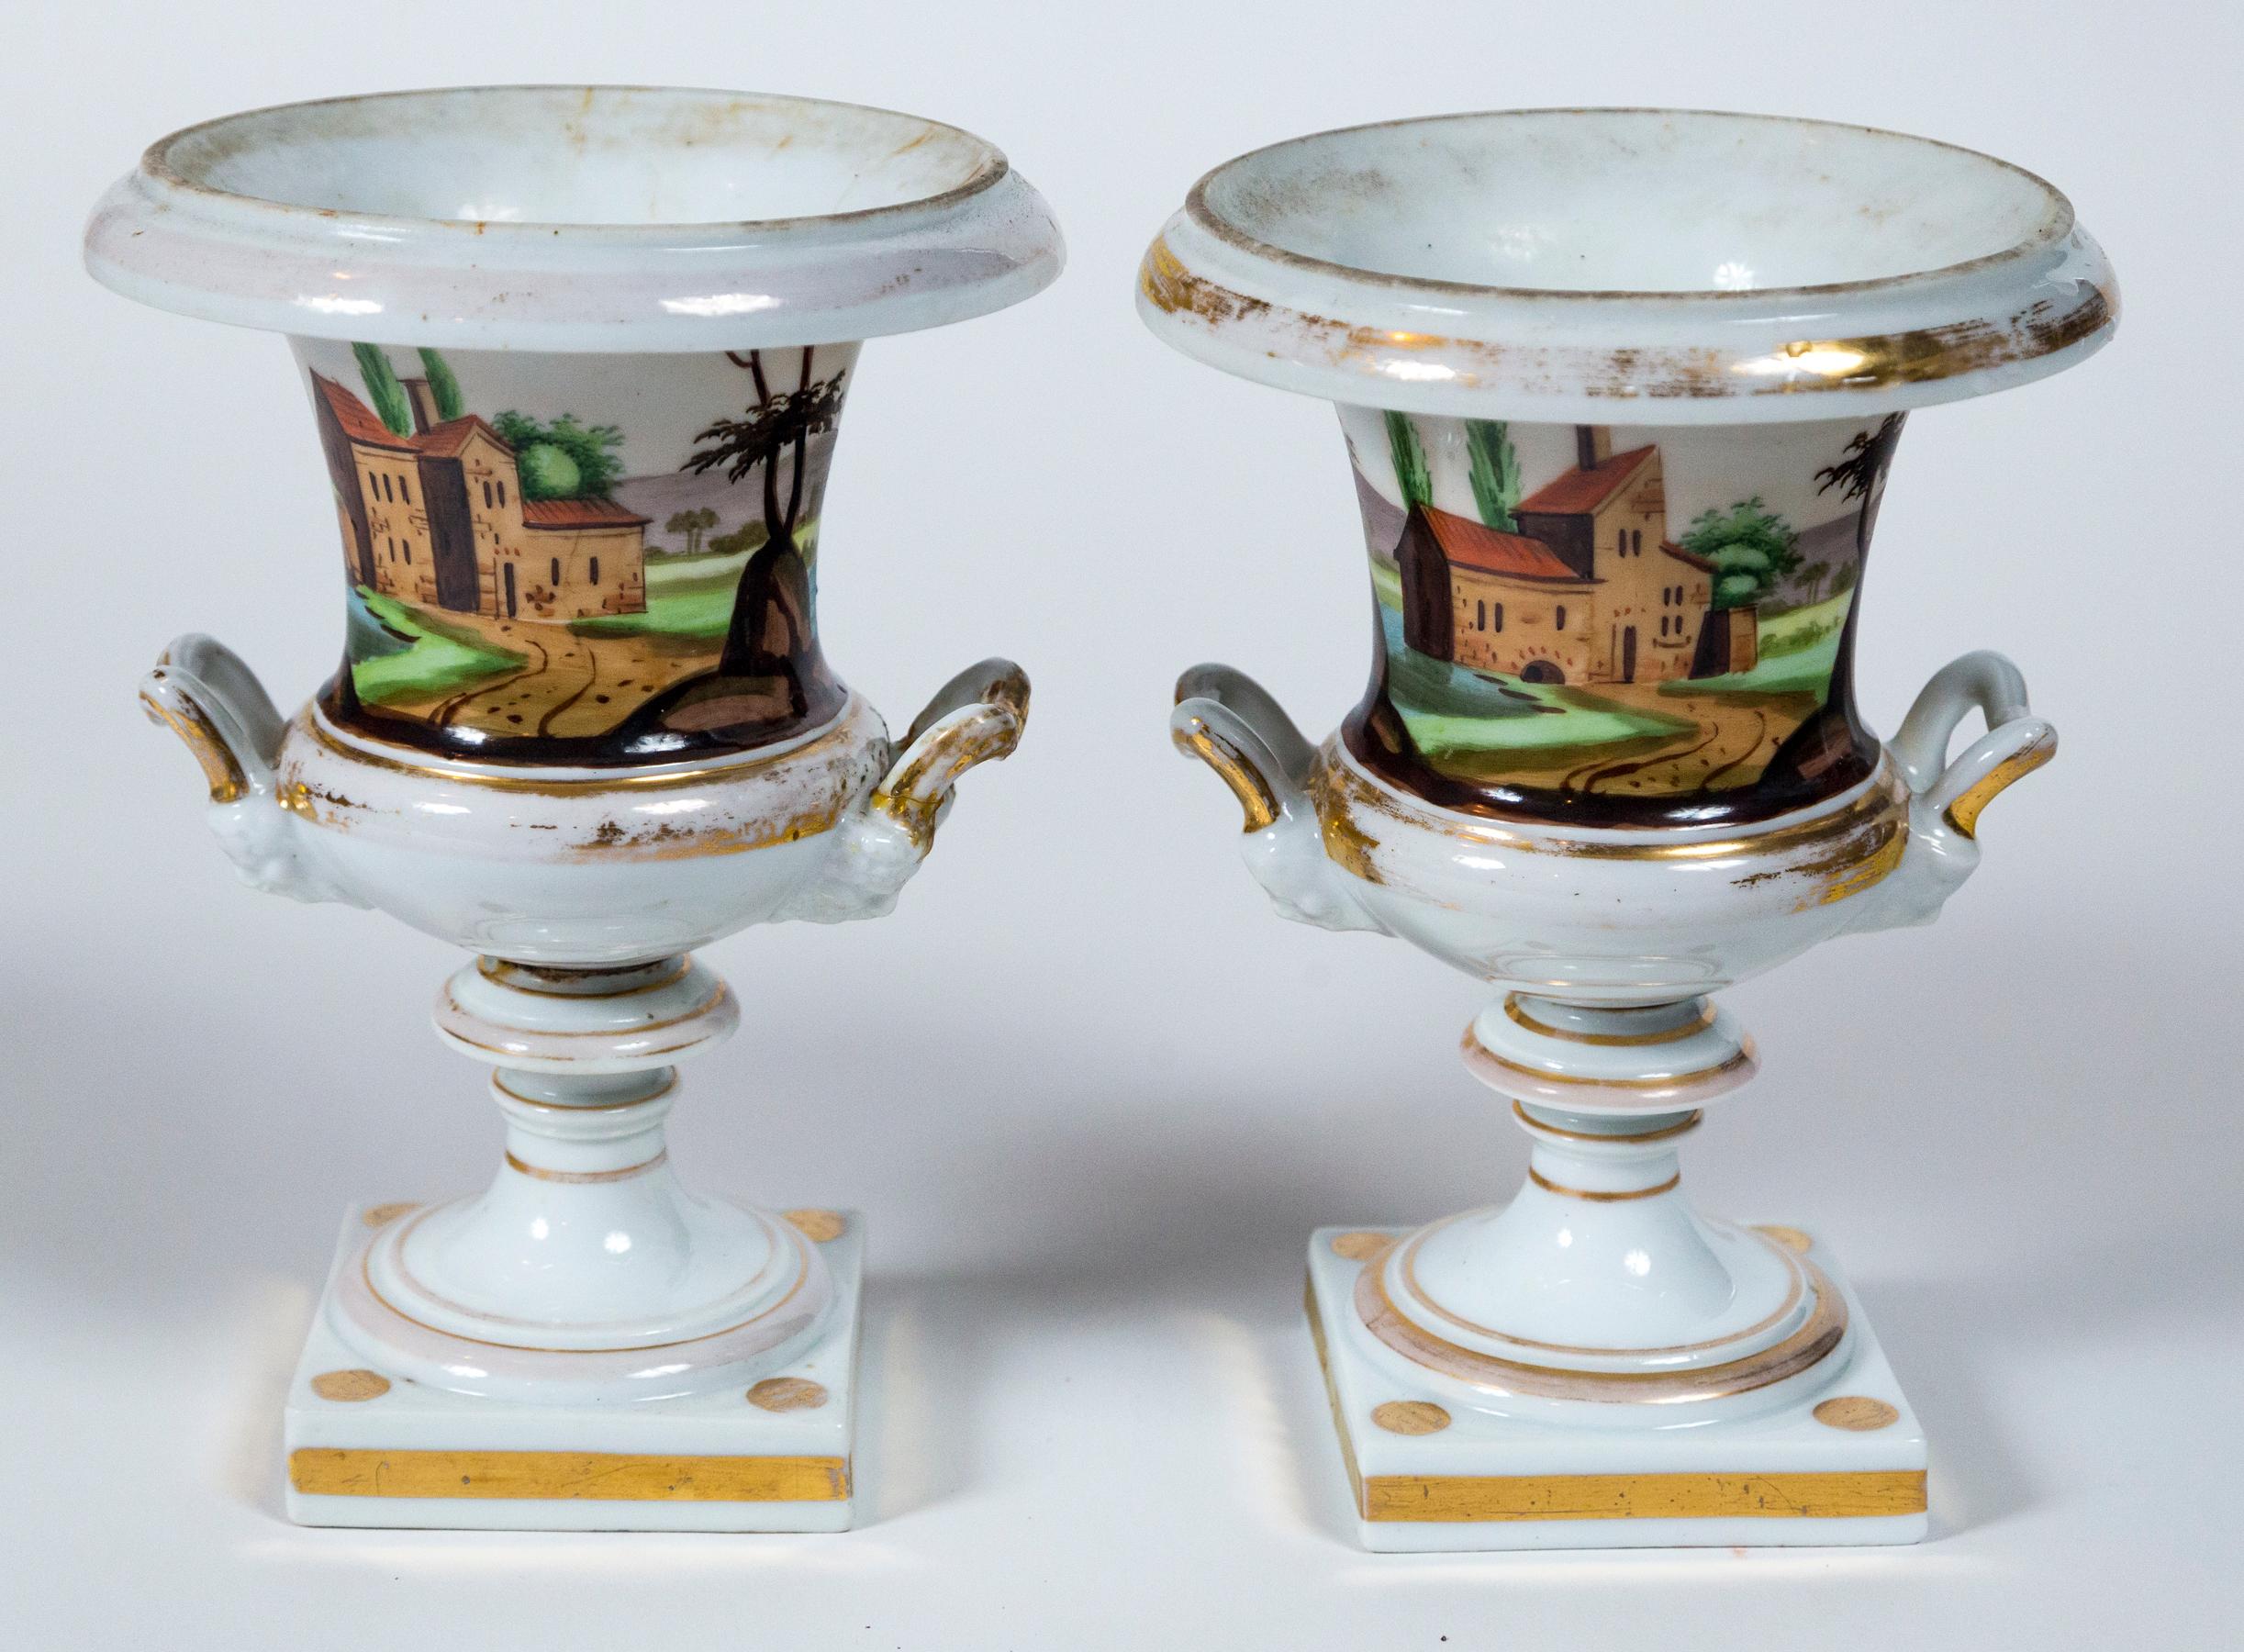 Pair Old Paris porcelain urns, France, 19th Century. Hand-painted classical form urns. A different landscape scene on each urn. Lovely colors with gold trim.